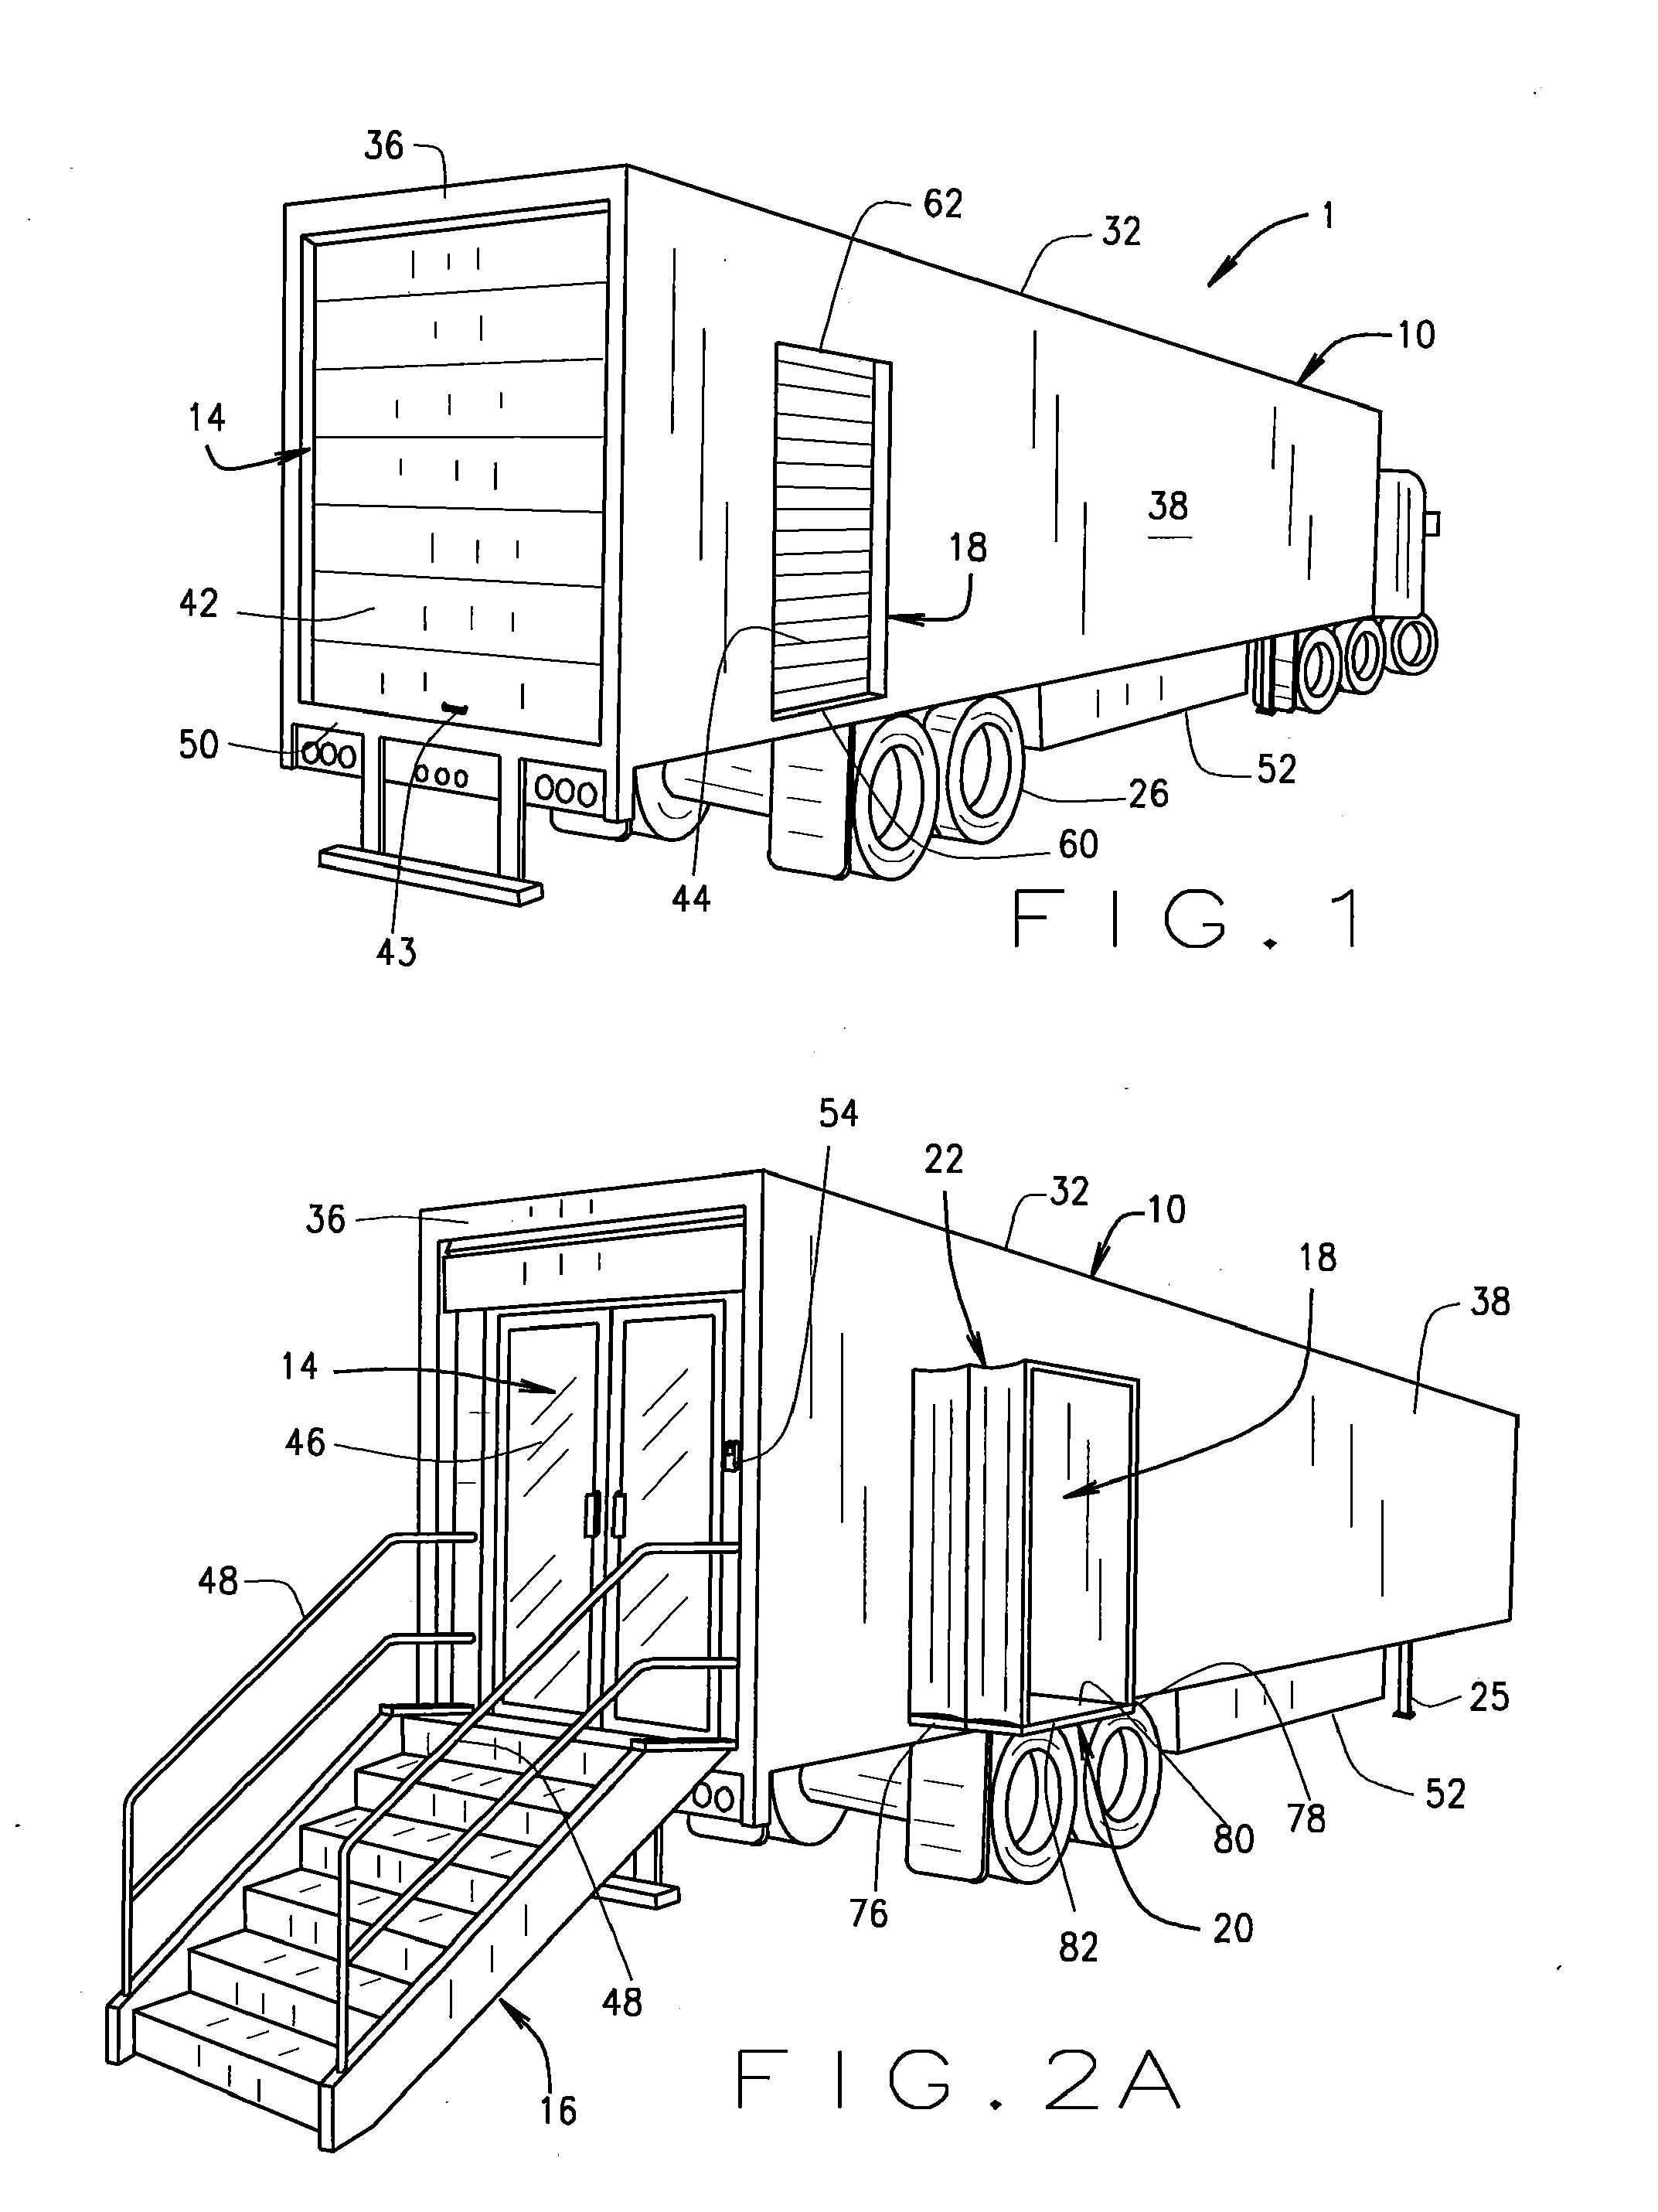 Mobile retail store structure with inventory system